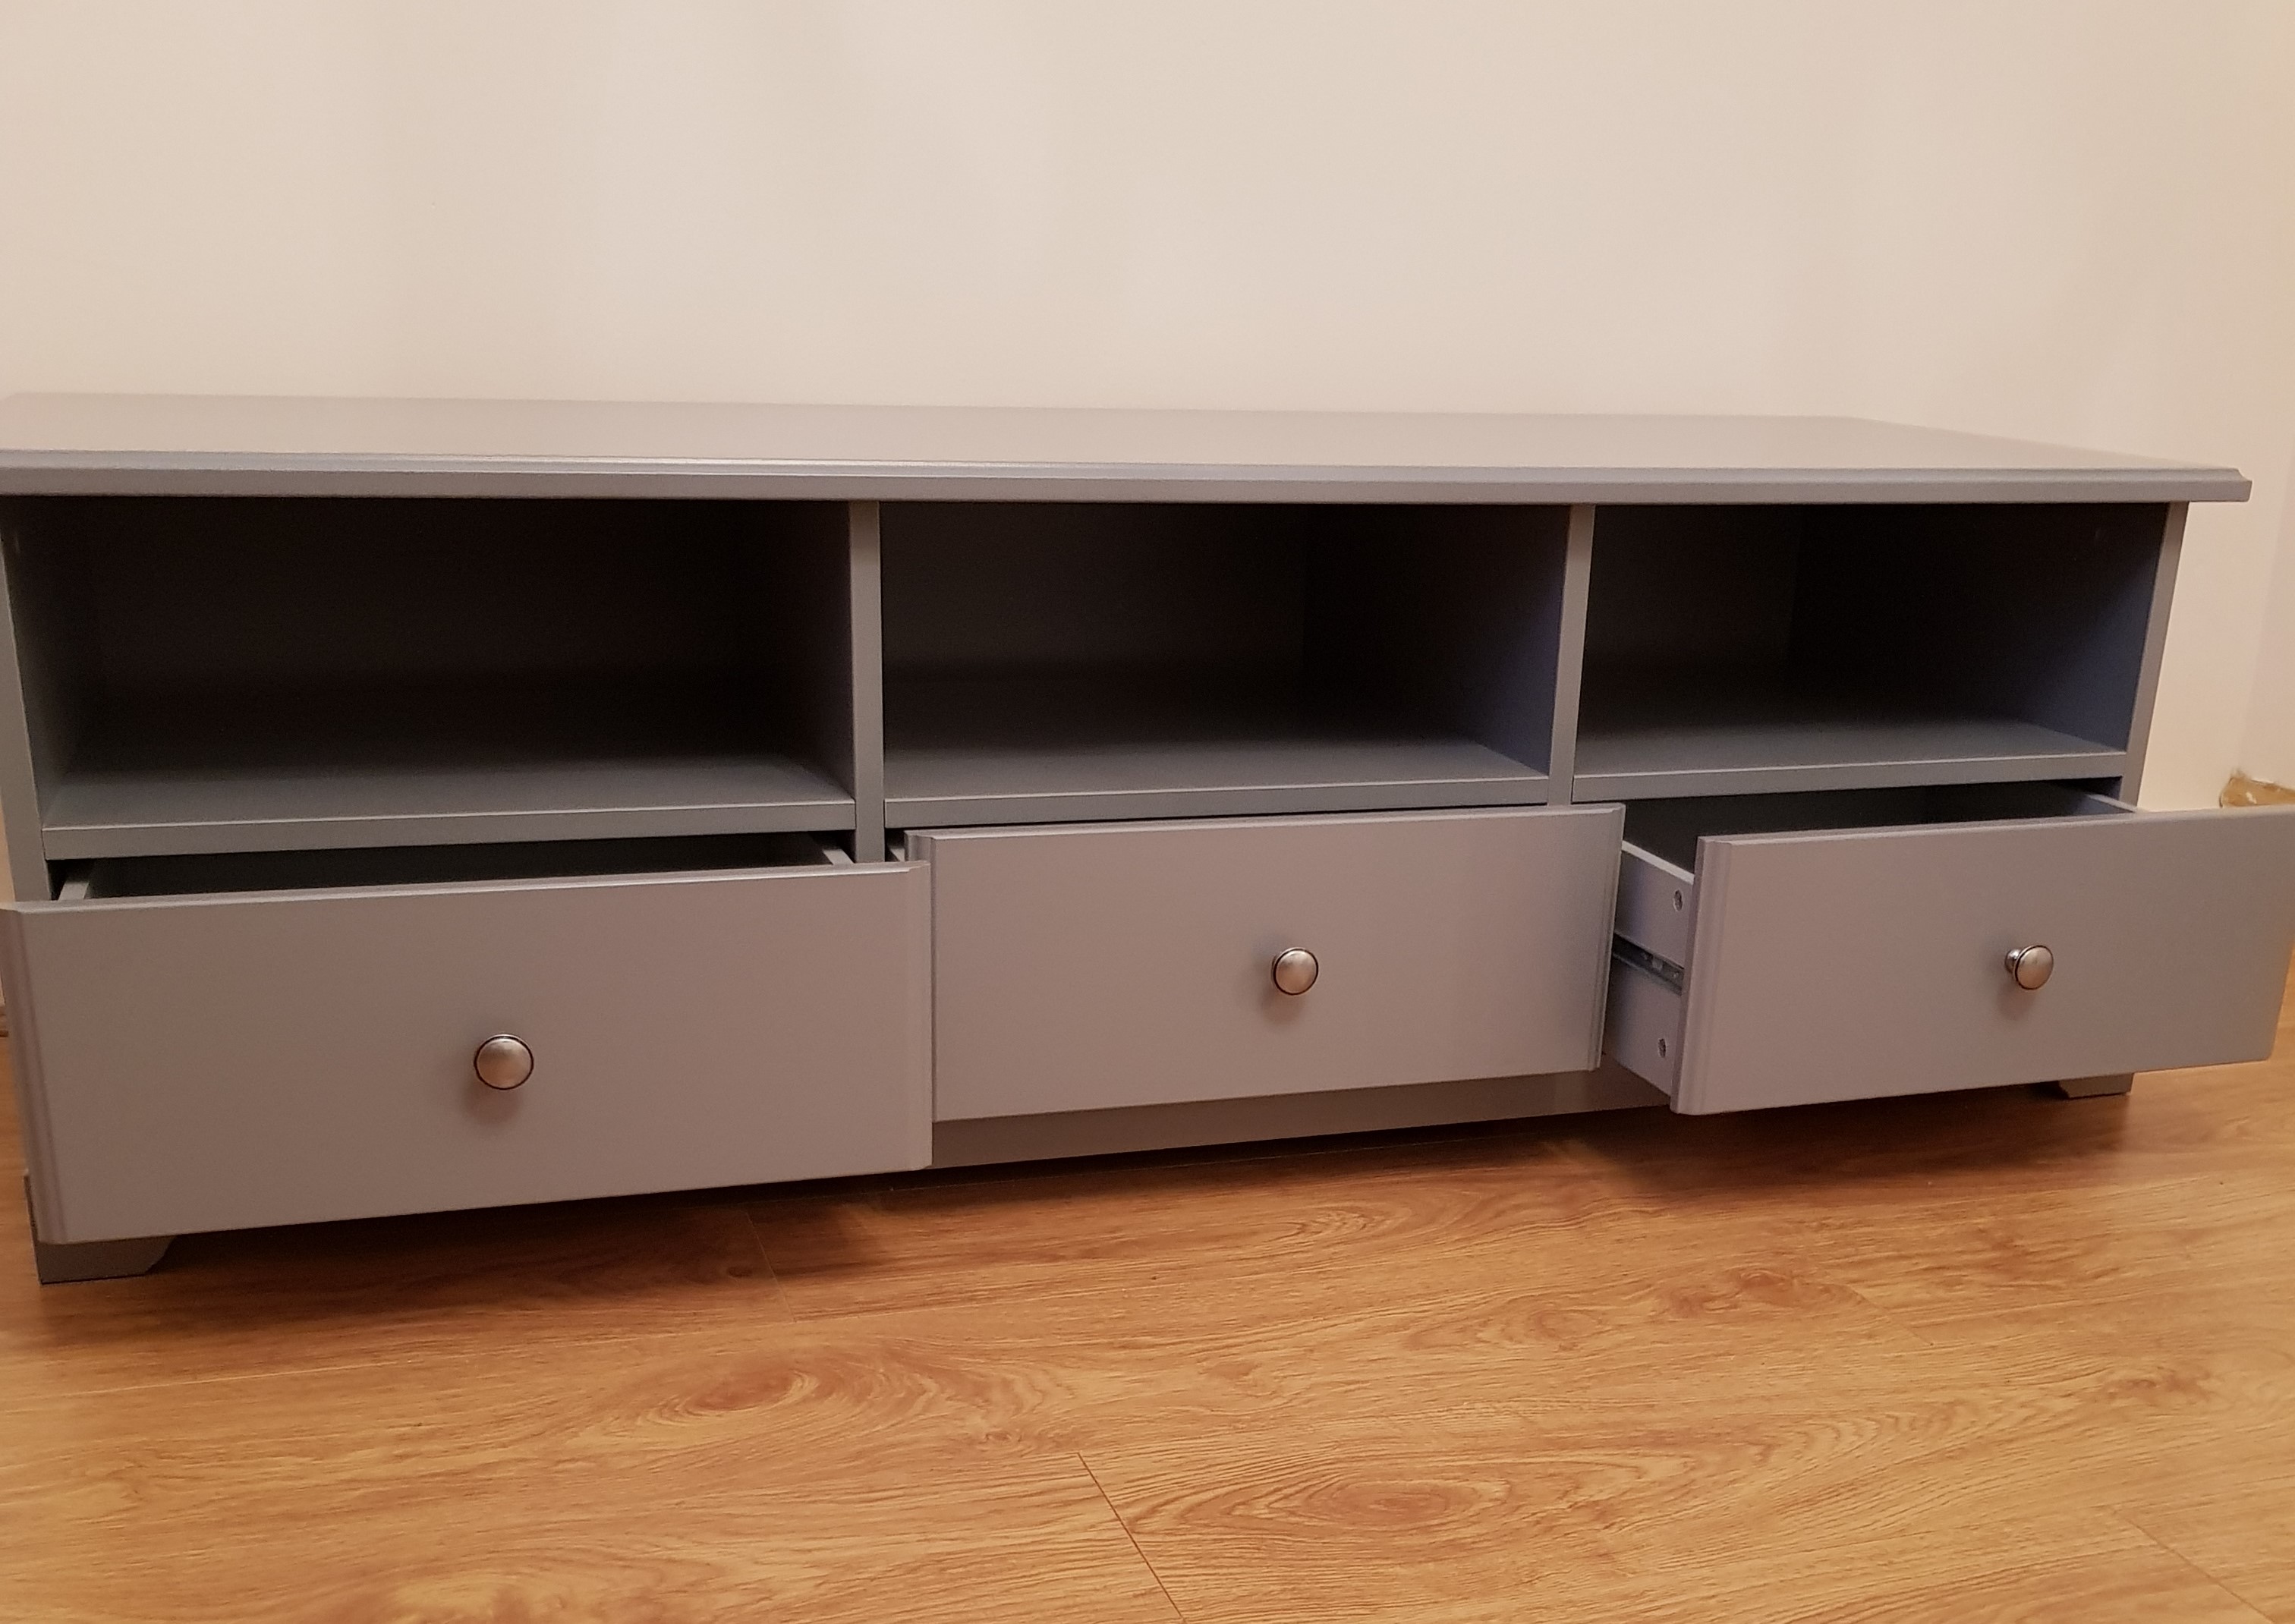 Flatpack furniture assembly in the Loughton, Debden CHigwell and surrounding areas, by Loughton Handyman